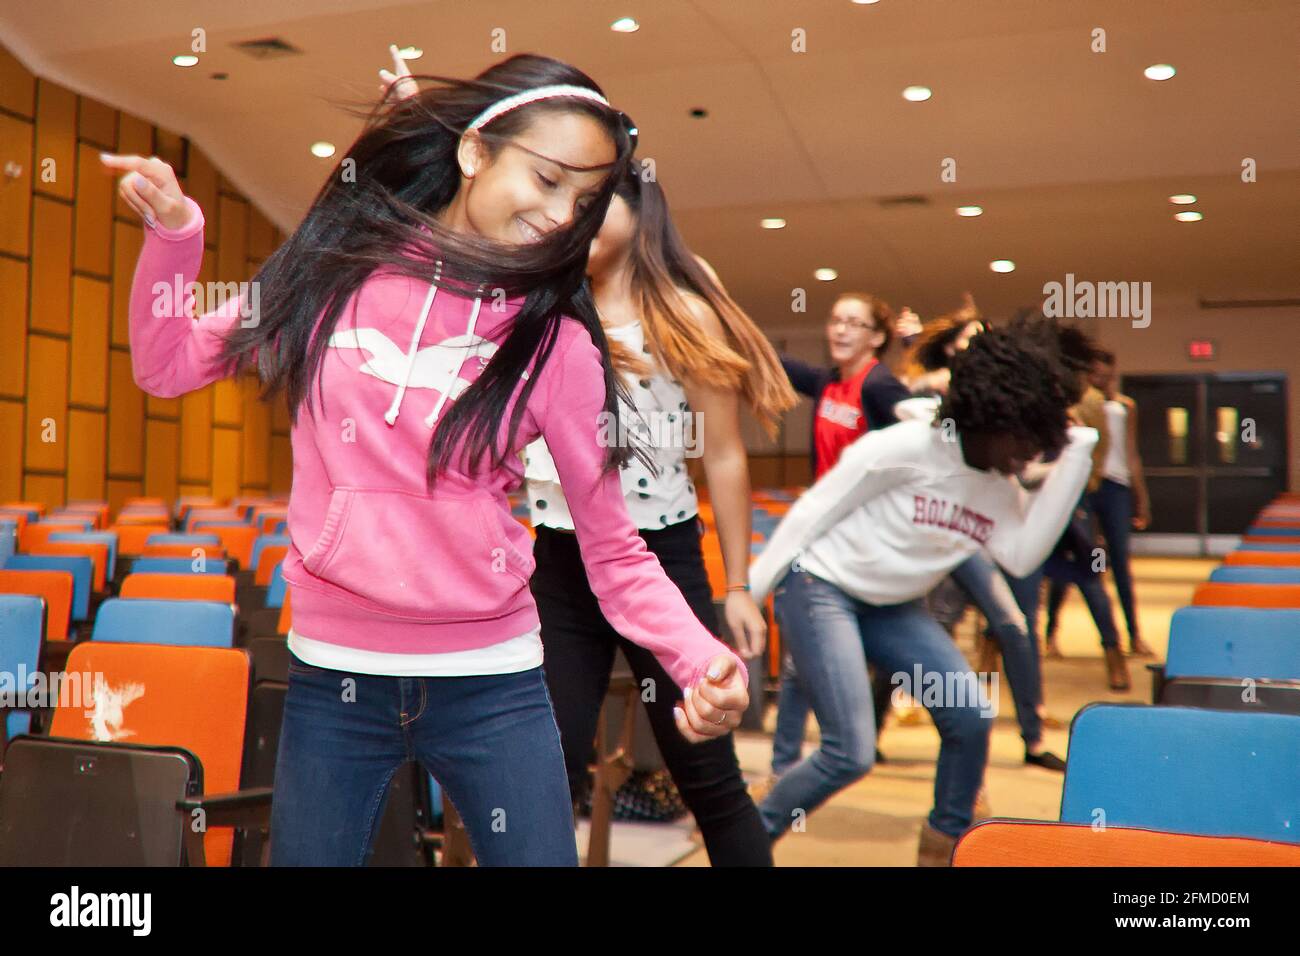 Students rehearsing for a show in the school auditorium Stock Photo